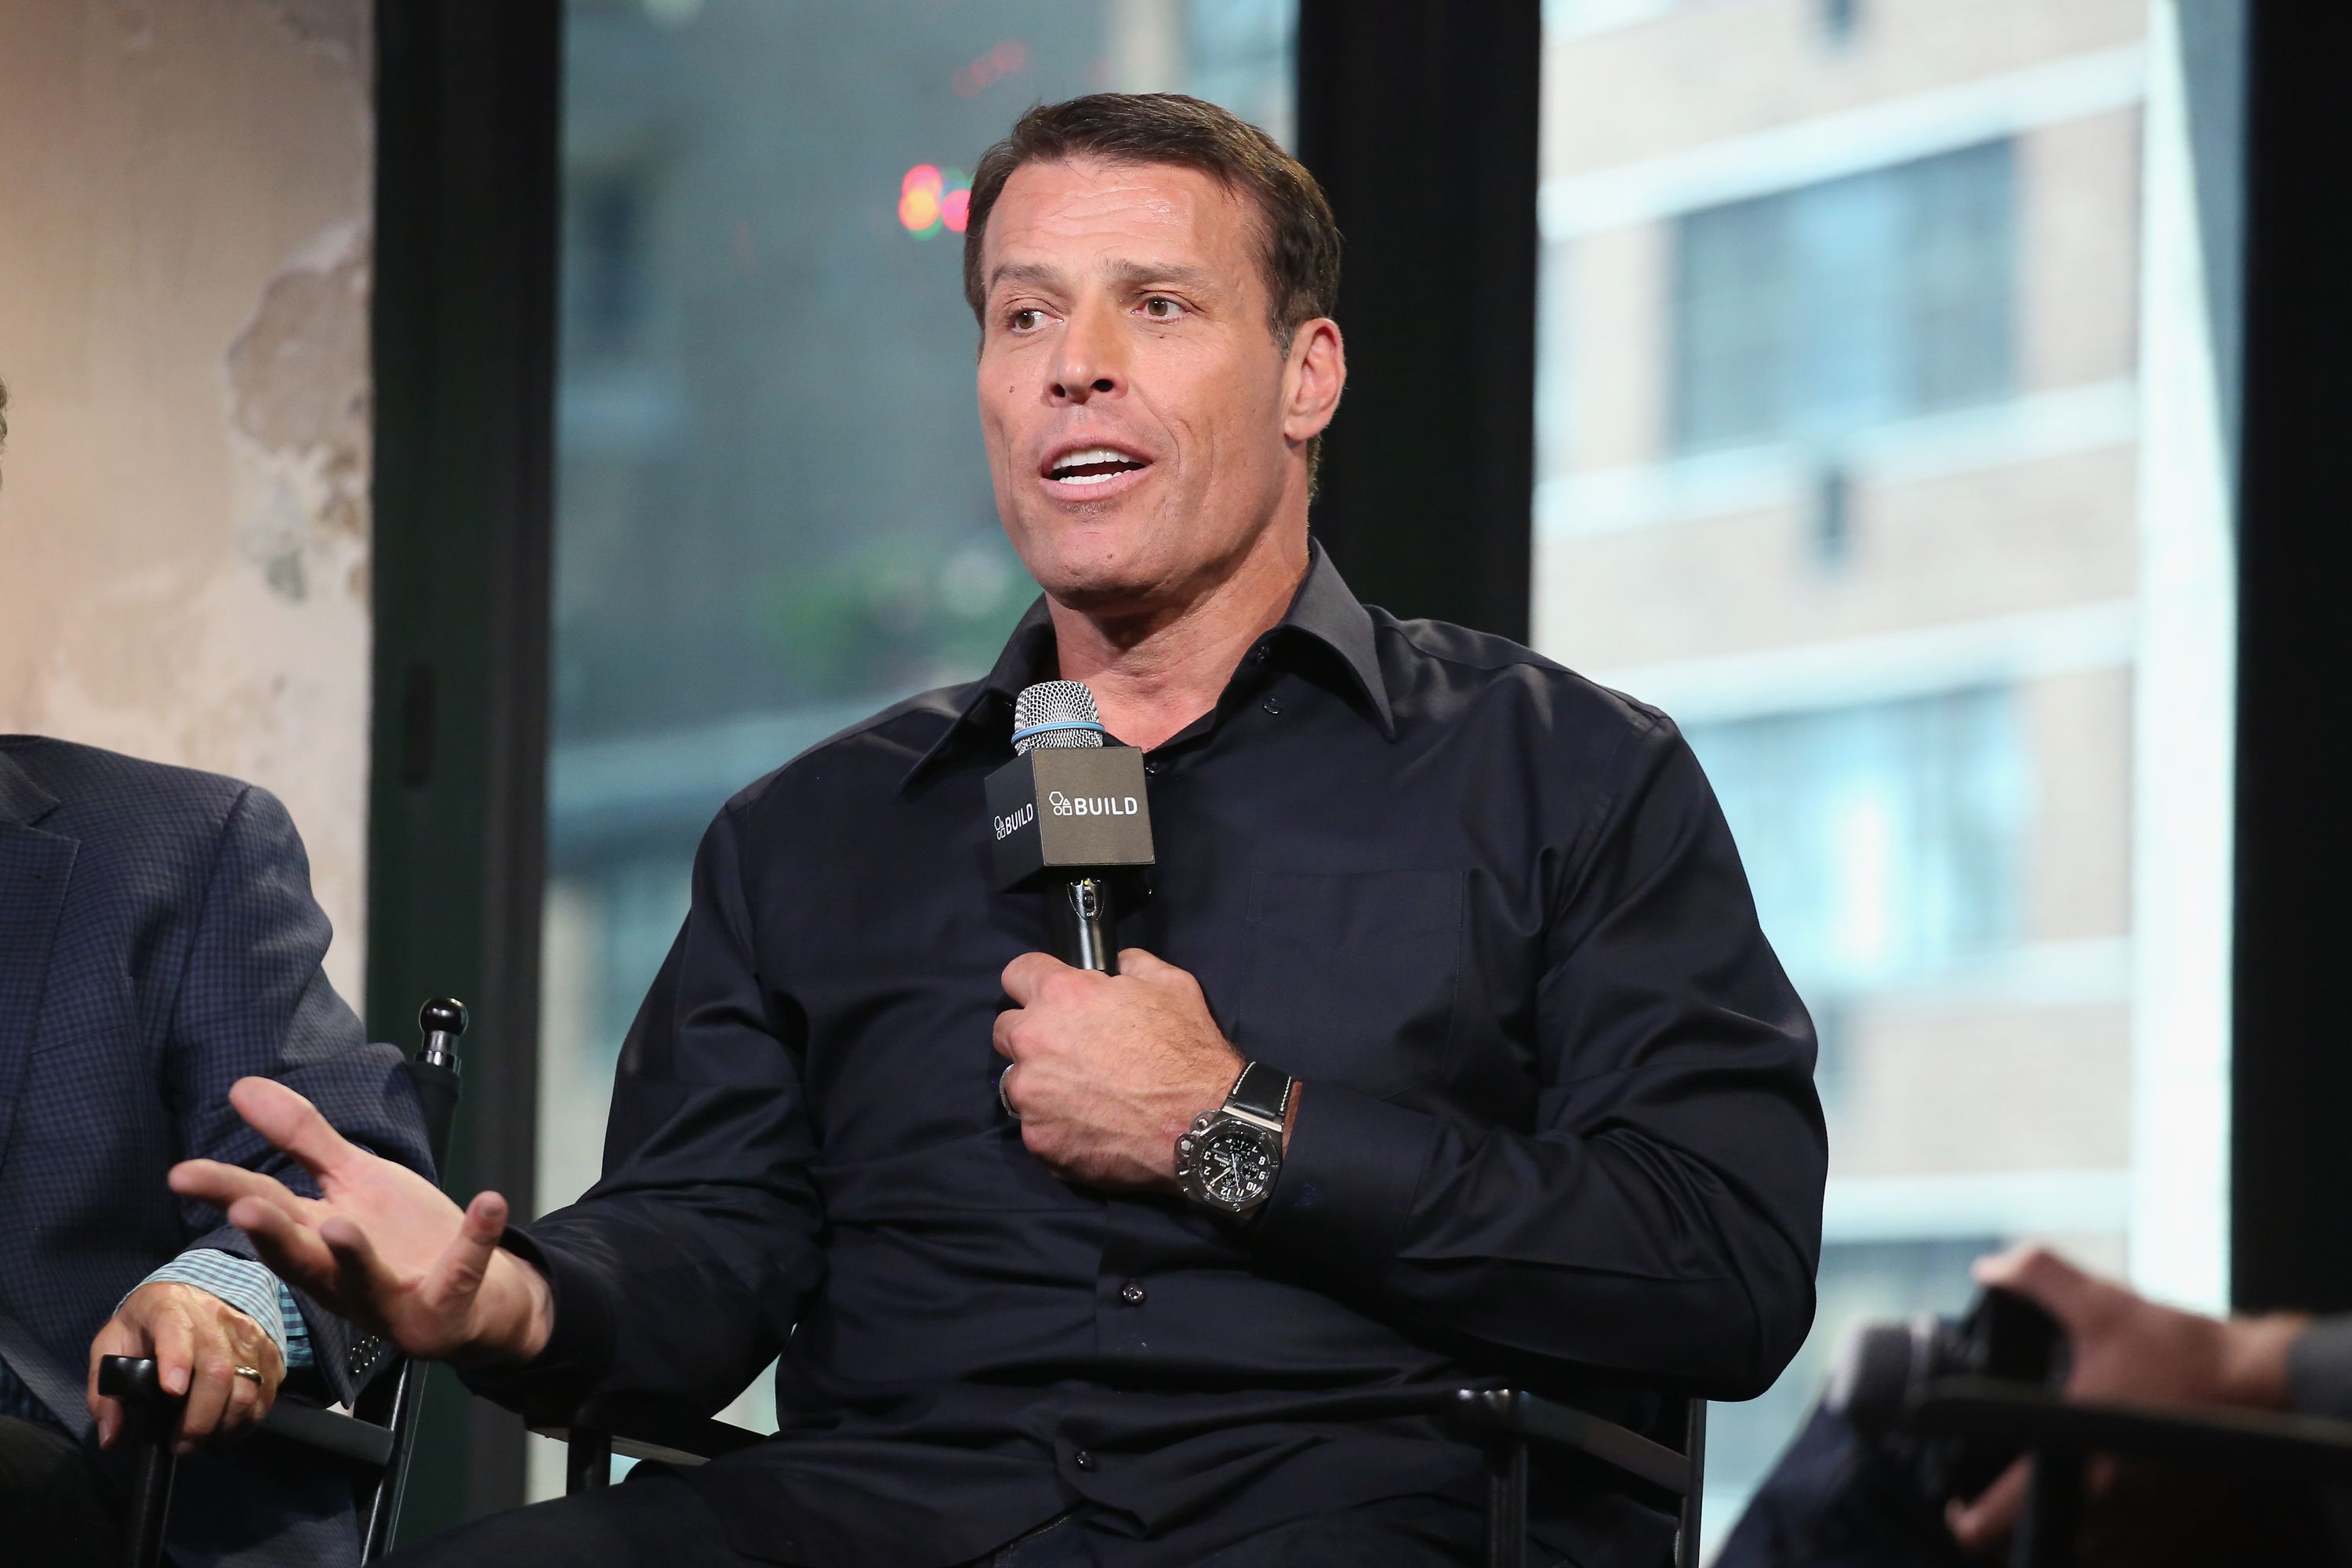 Tony Robbins speaks about his documentary "I Am Not Your Guru" in 2016 in New York | Source: Getty Images